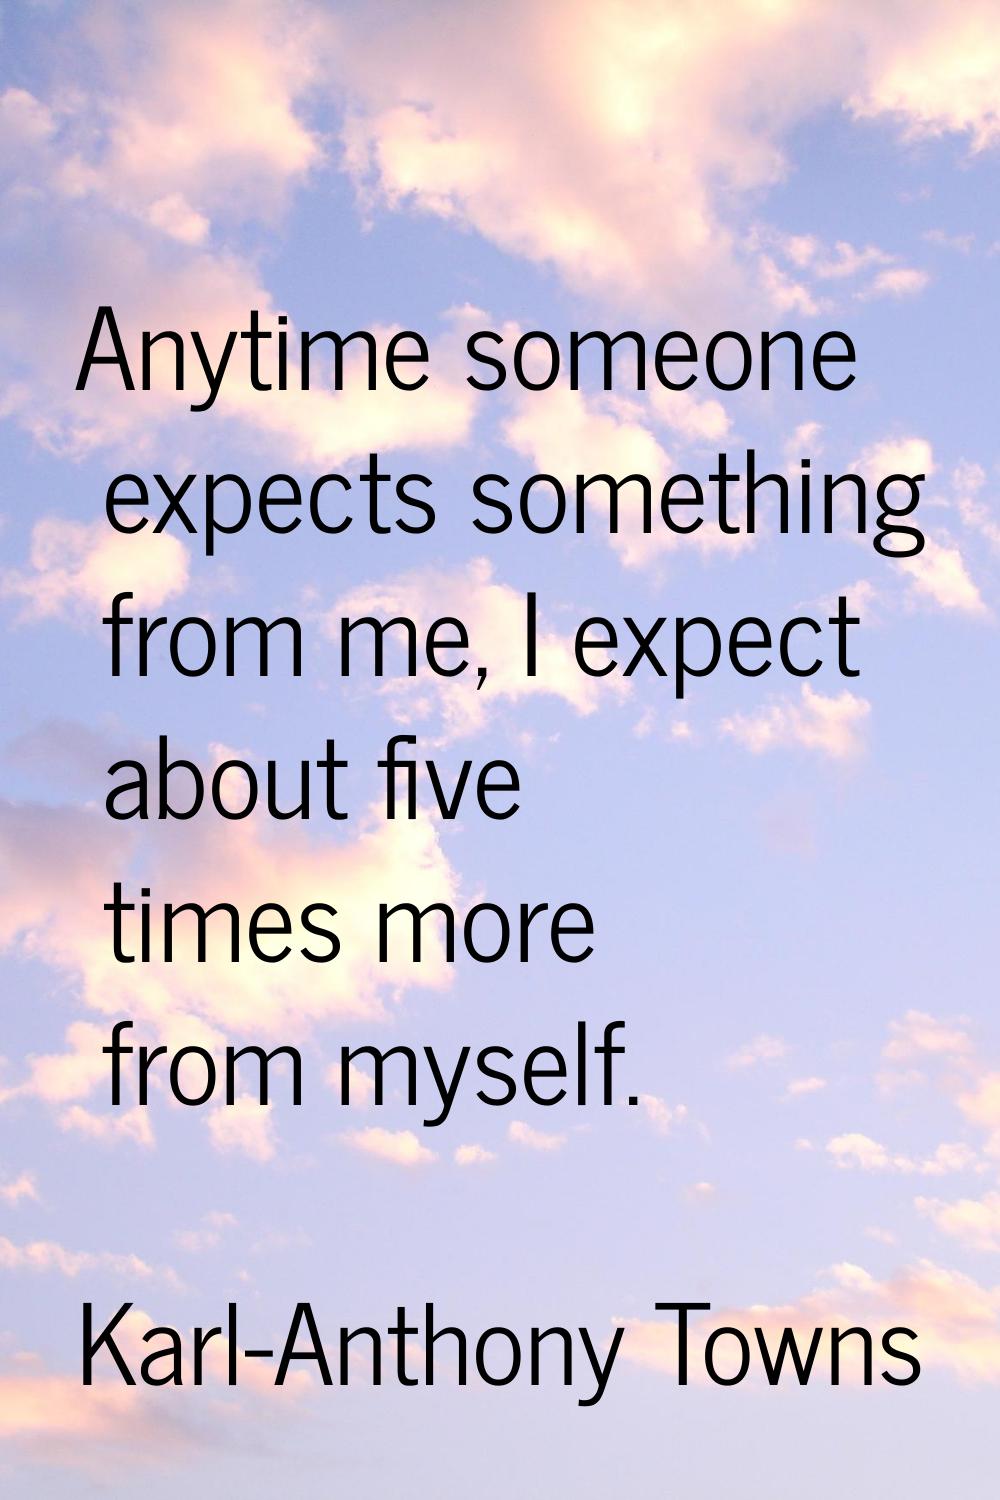 Anytime someone expects something from me, I expect about five times more from myself.